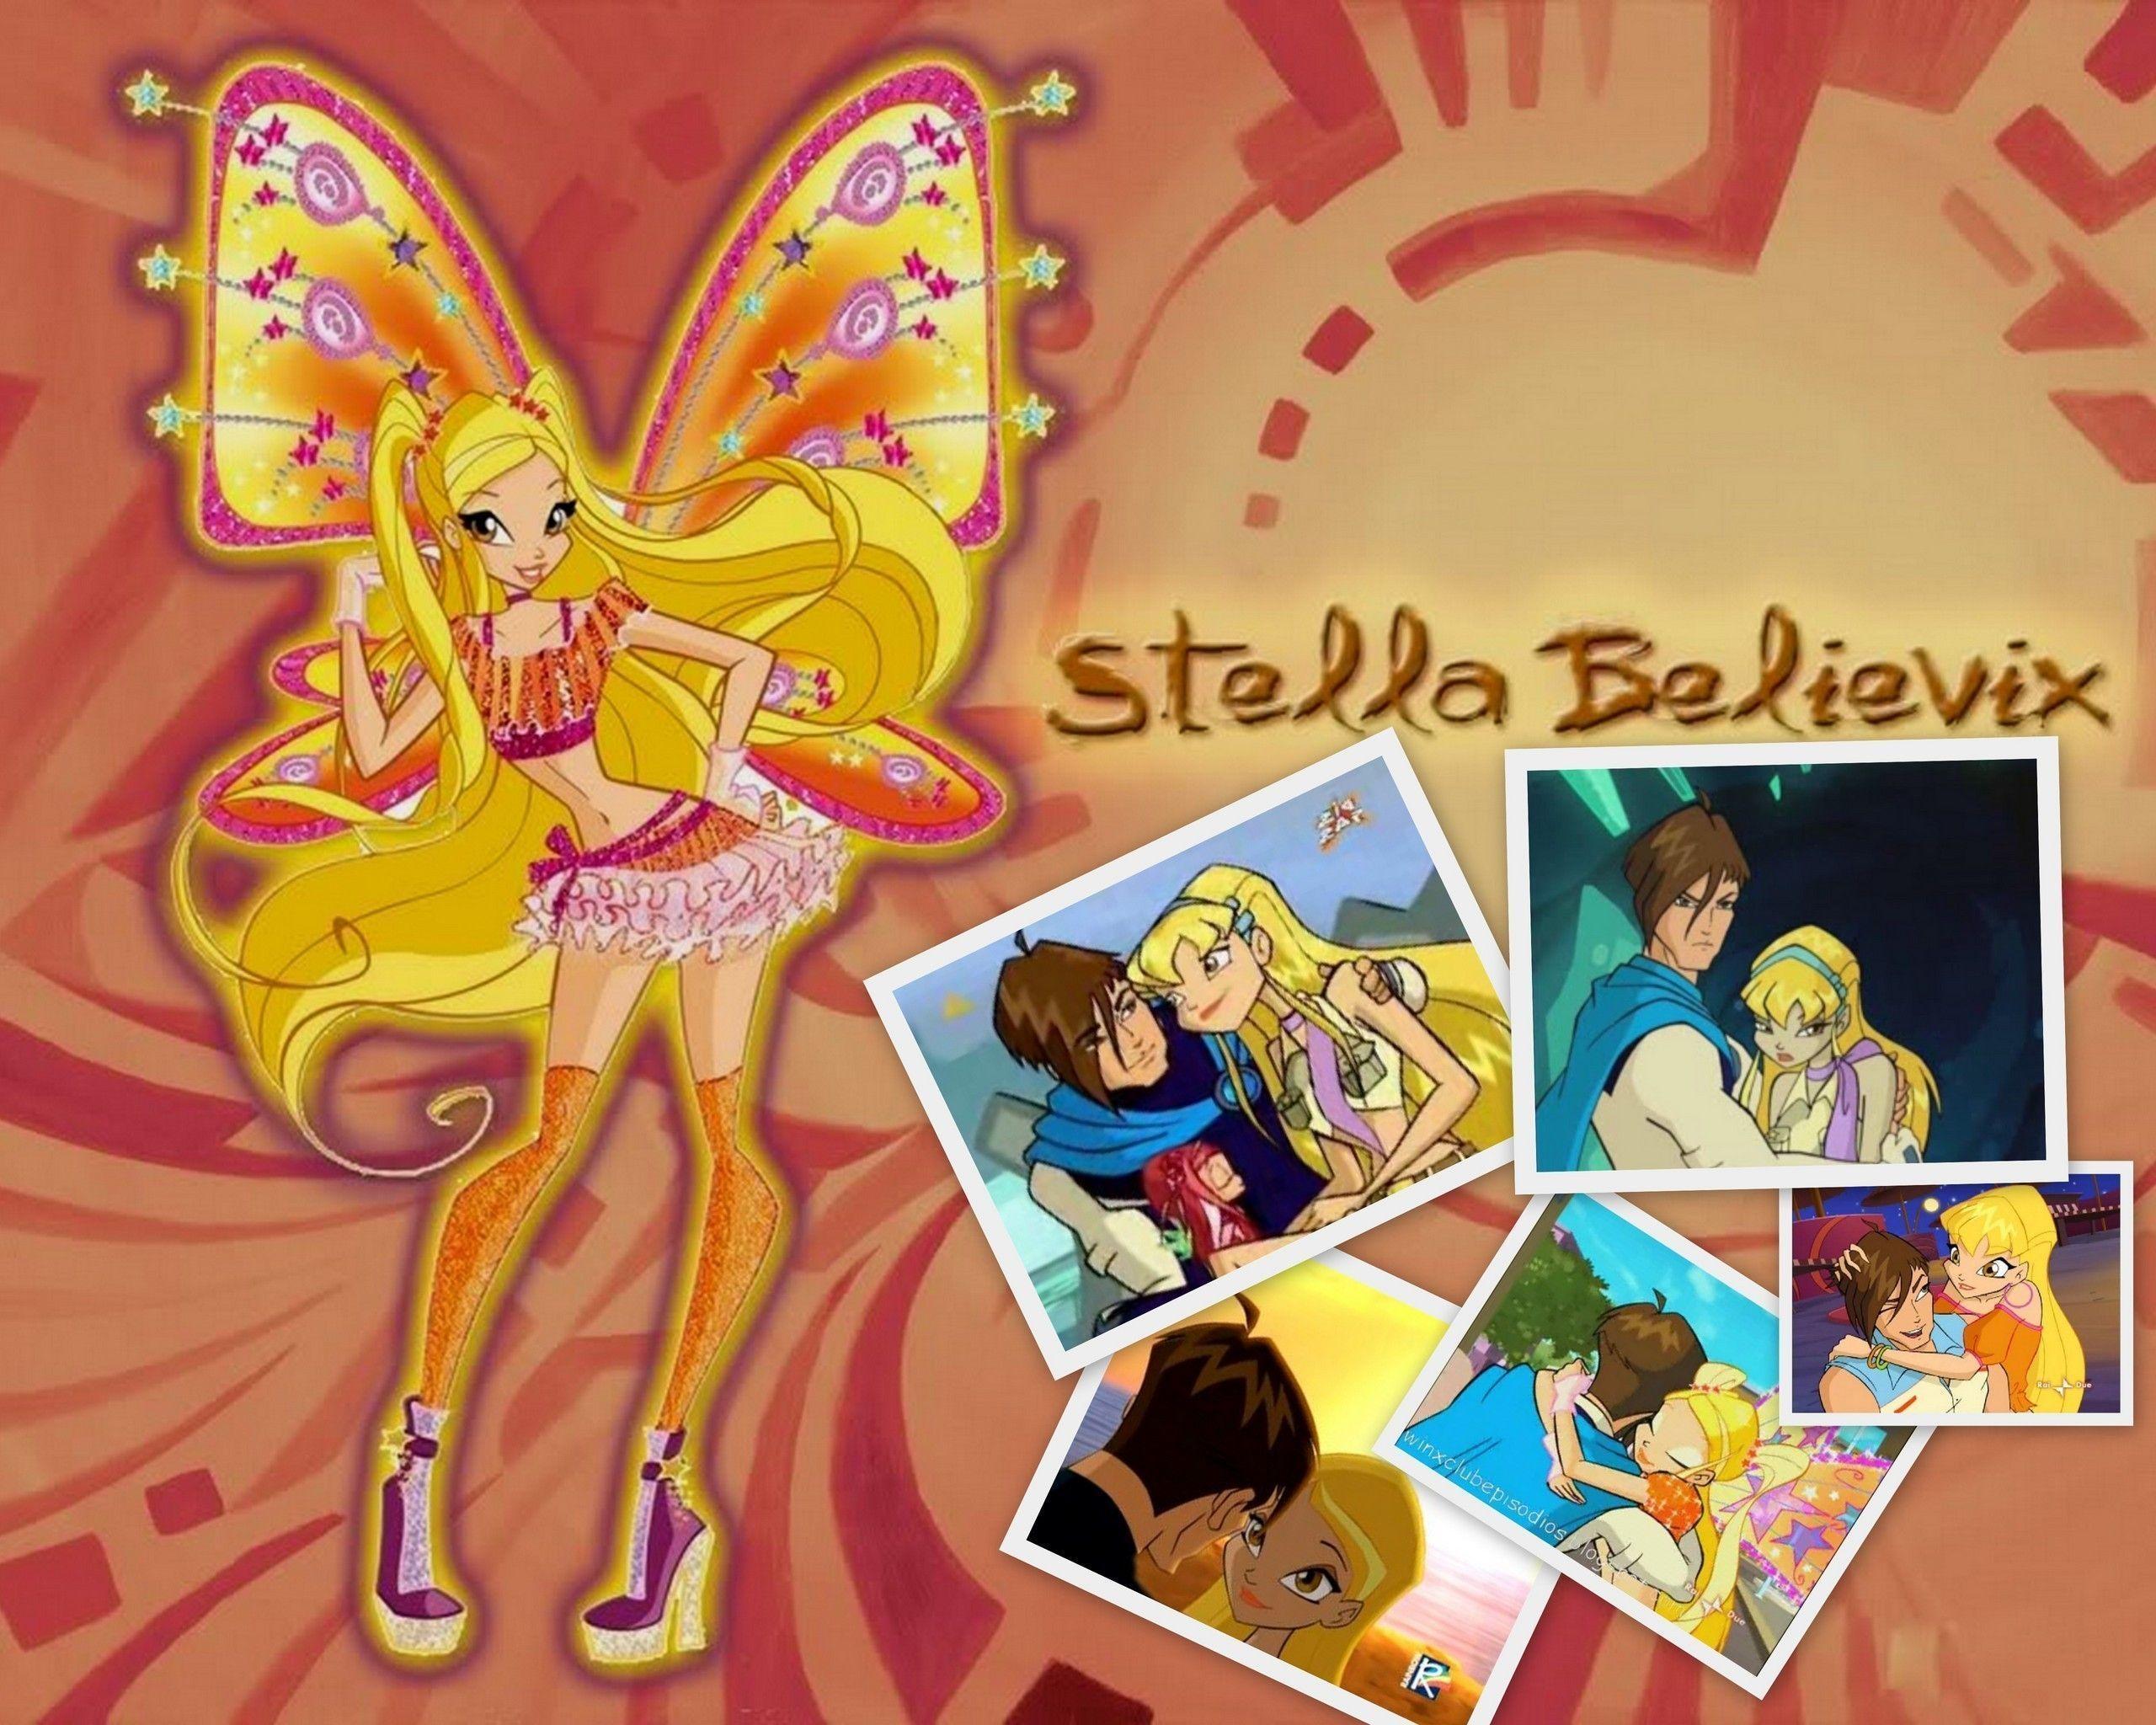 Couples from Winx Club image couples HD wallpaper and background